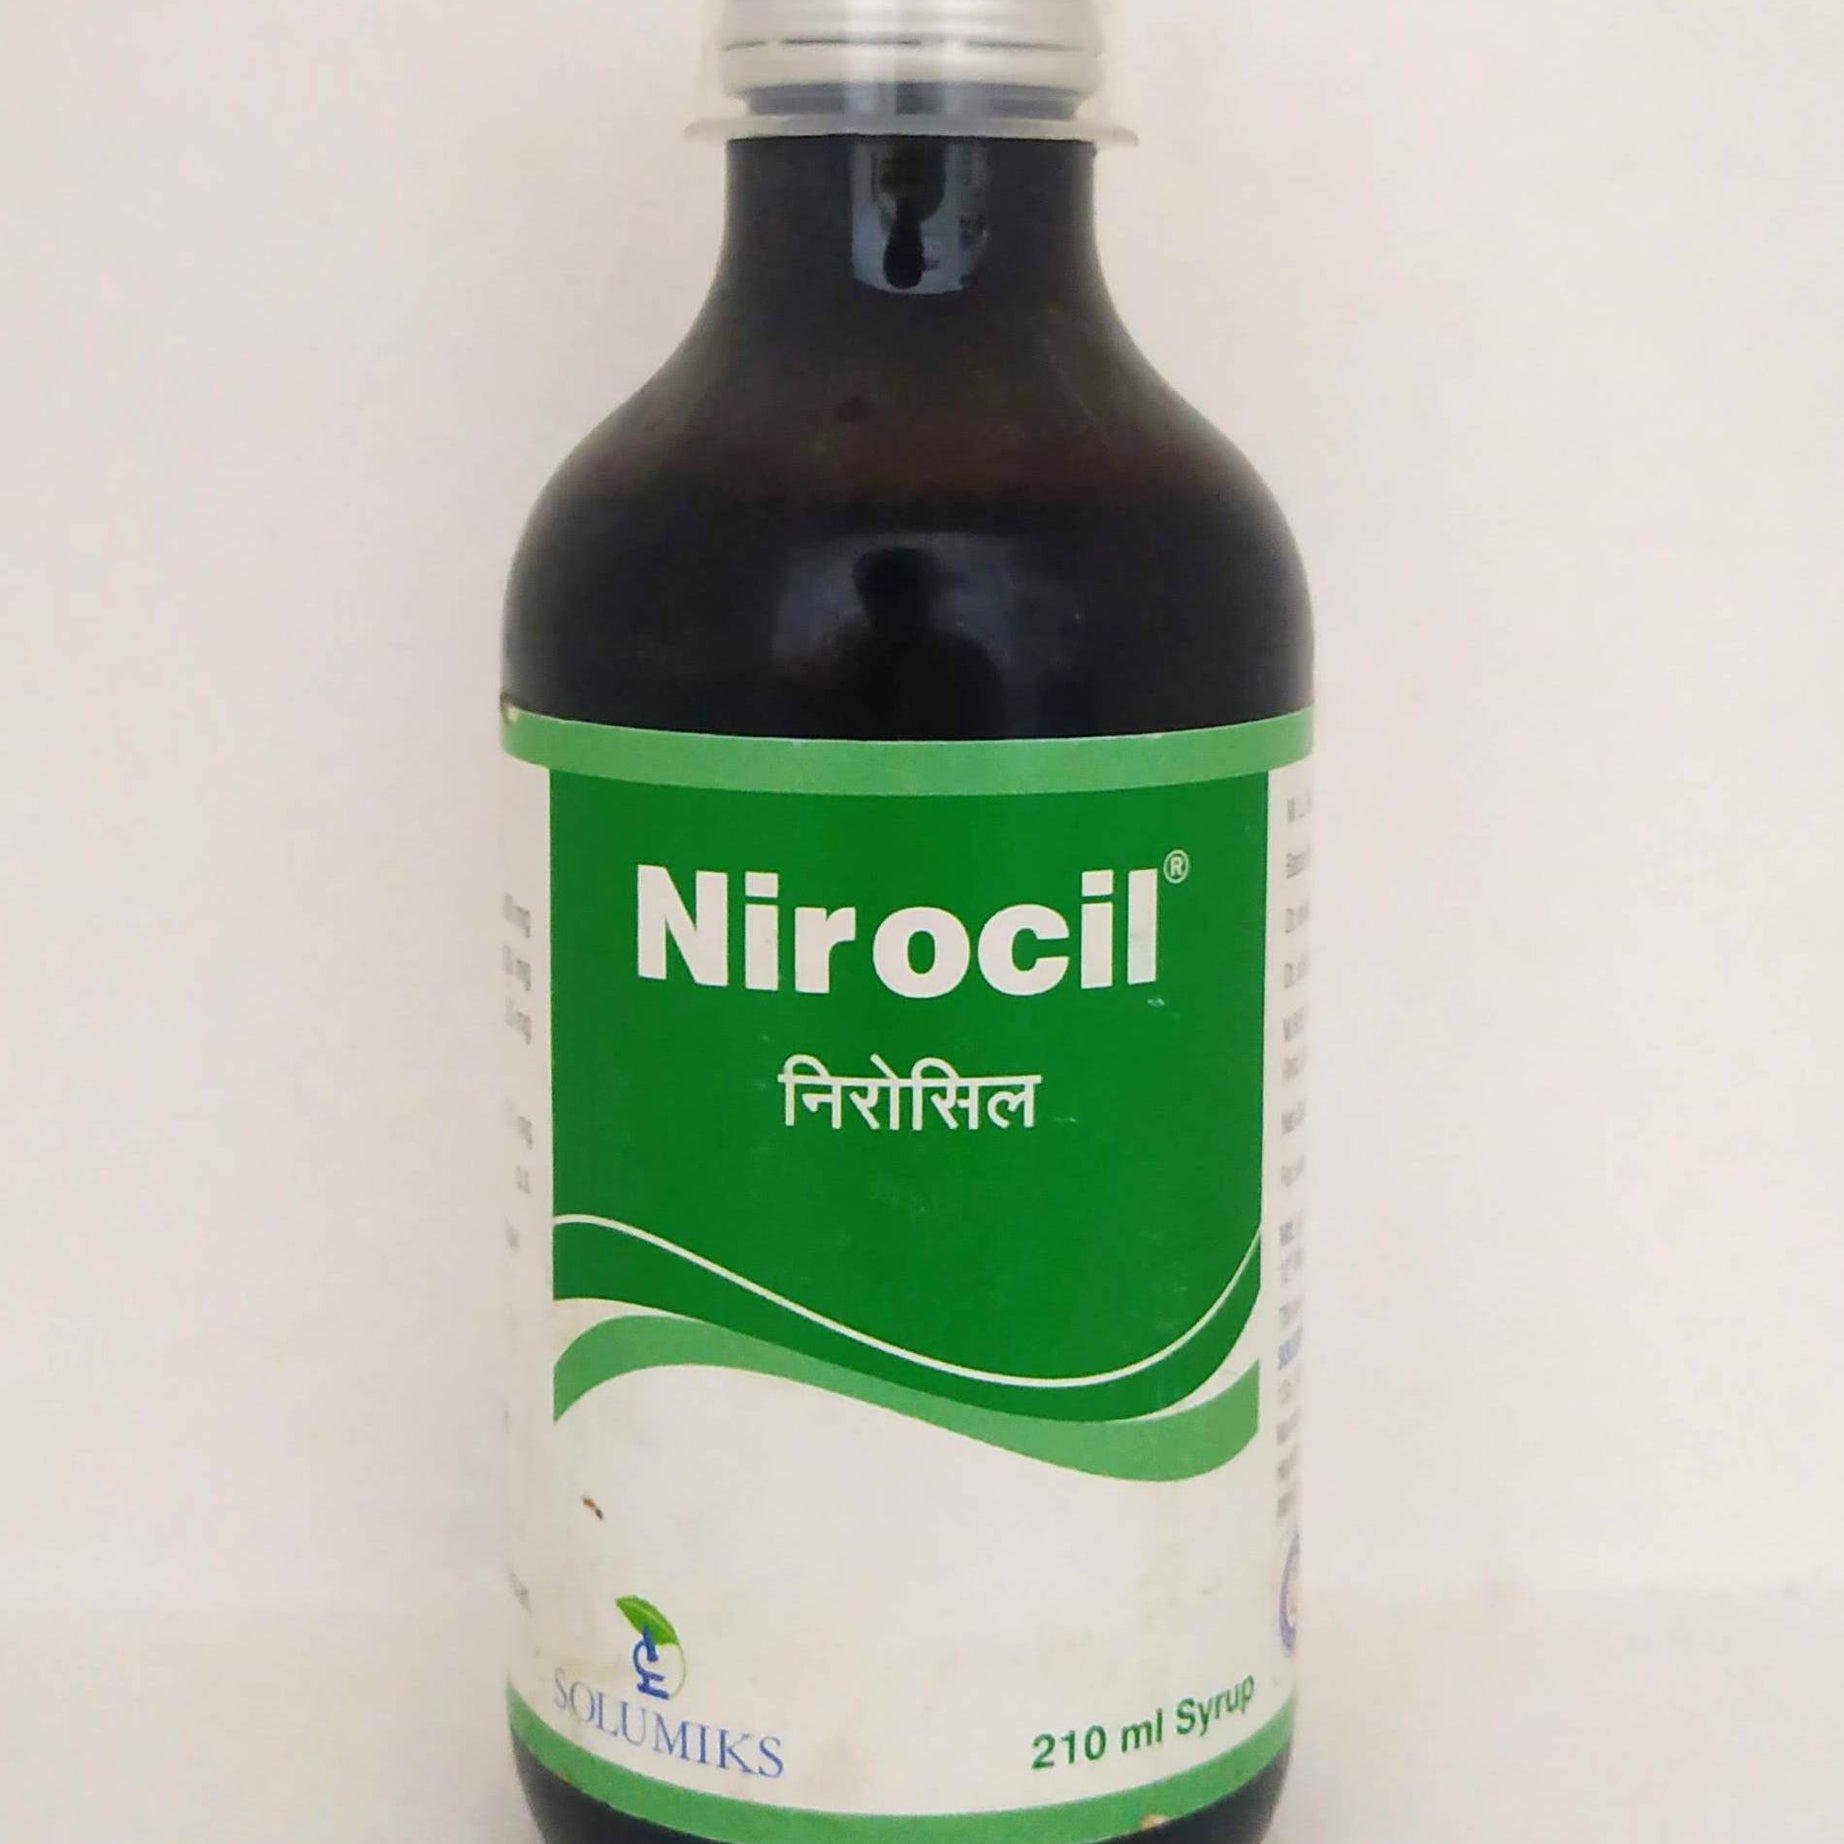 Shop Nirocil Syrup 210ml at price 145.00 from Solumiks Online - Ayush Care